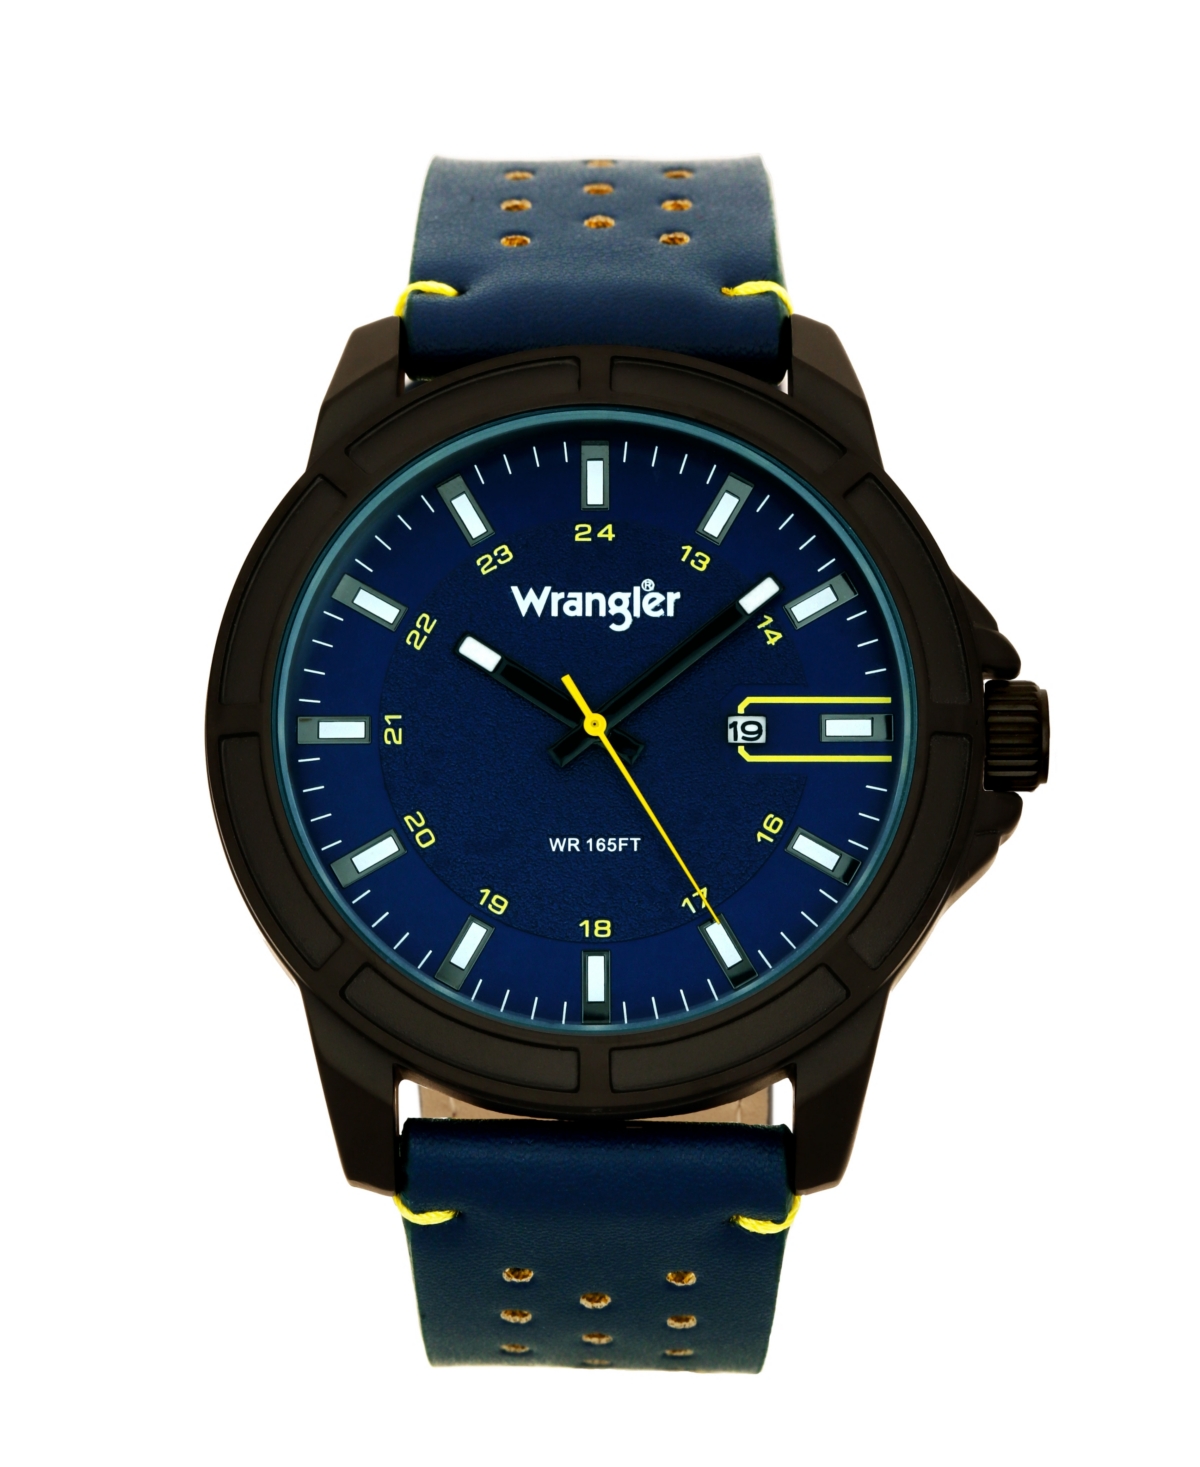 Men's, 48MM Ip Black Case, Blue Dial, White Index Markers, Sand Satin Dial, Analog, Date Function, Yellow Second Hand, Blue Strap with Yellow